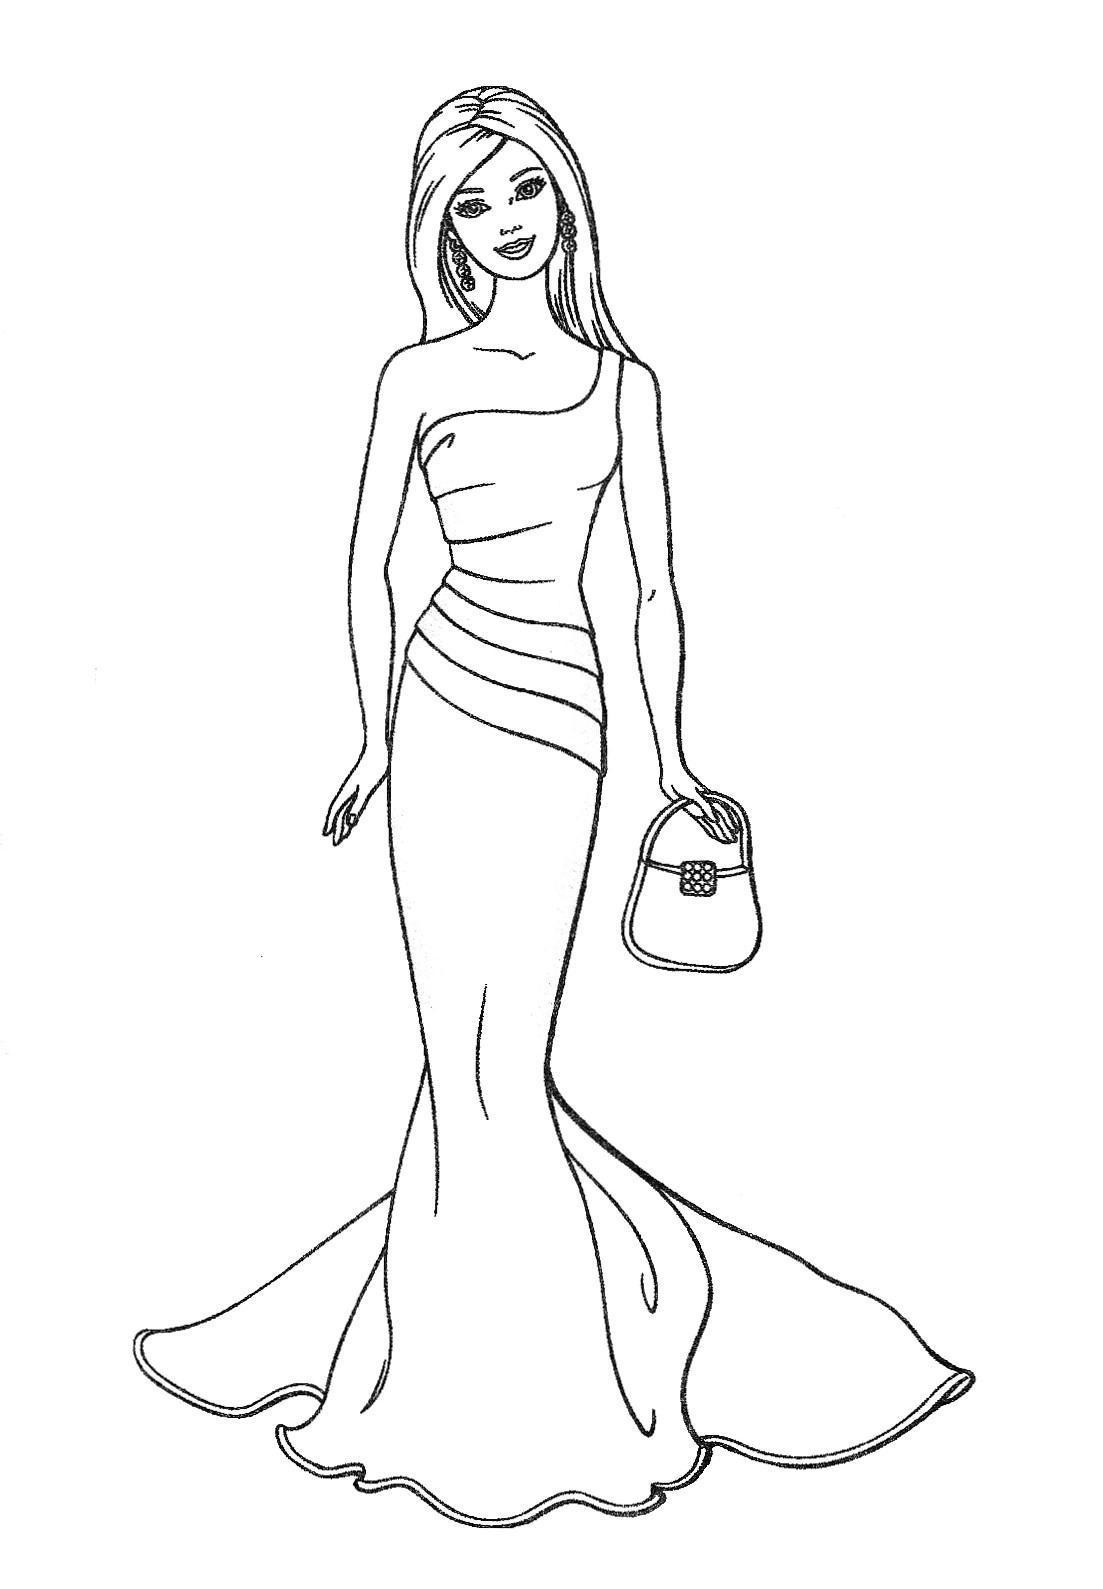 Barbie Coloring Pages Free Printable
 Free Printable Barbie Coloring Pages For Kids